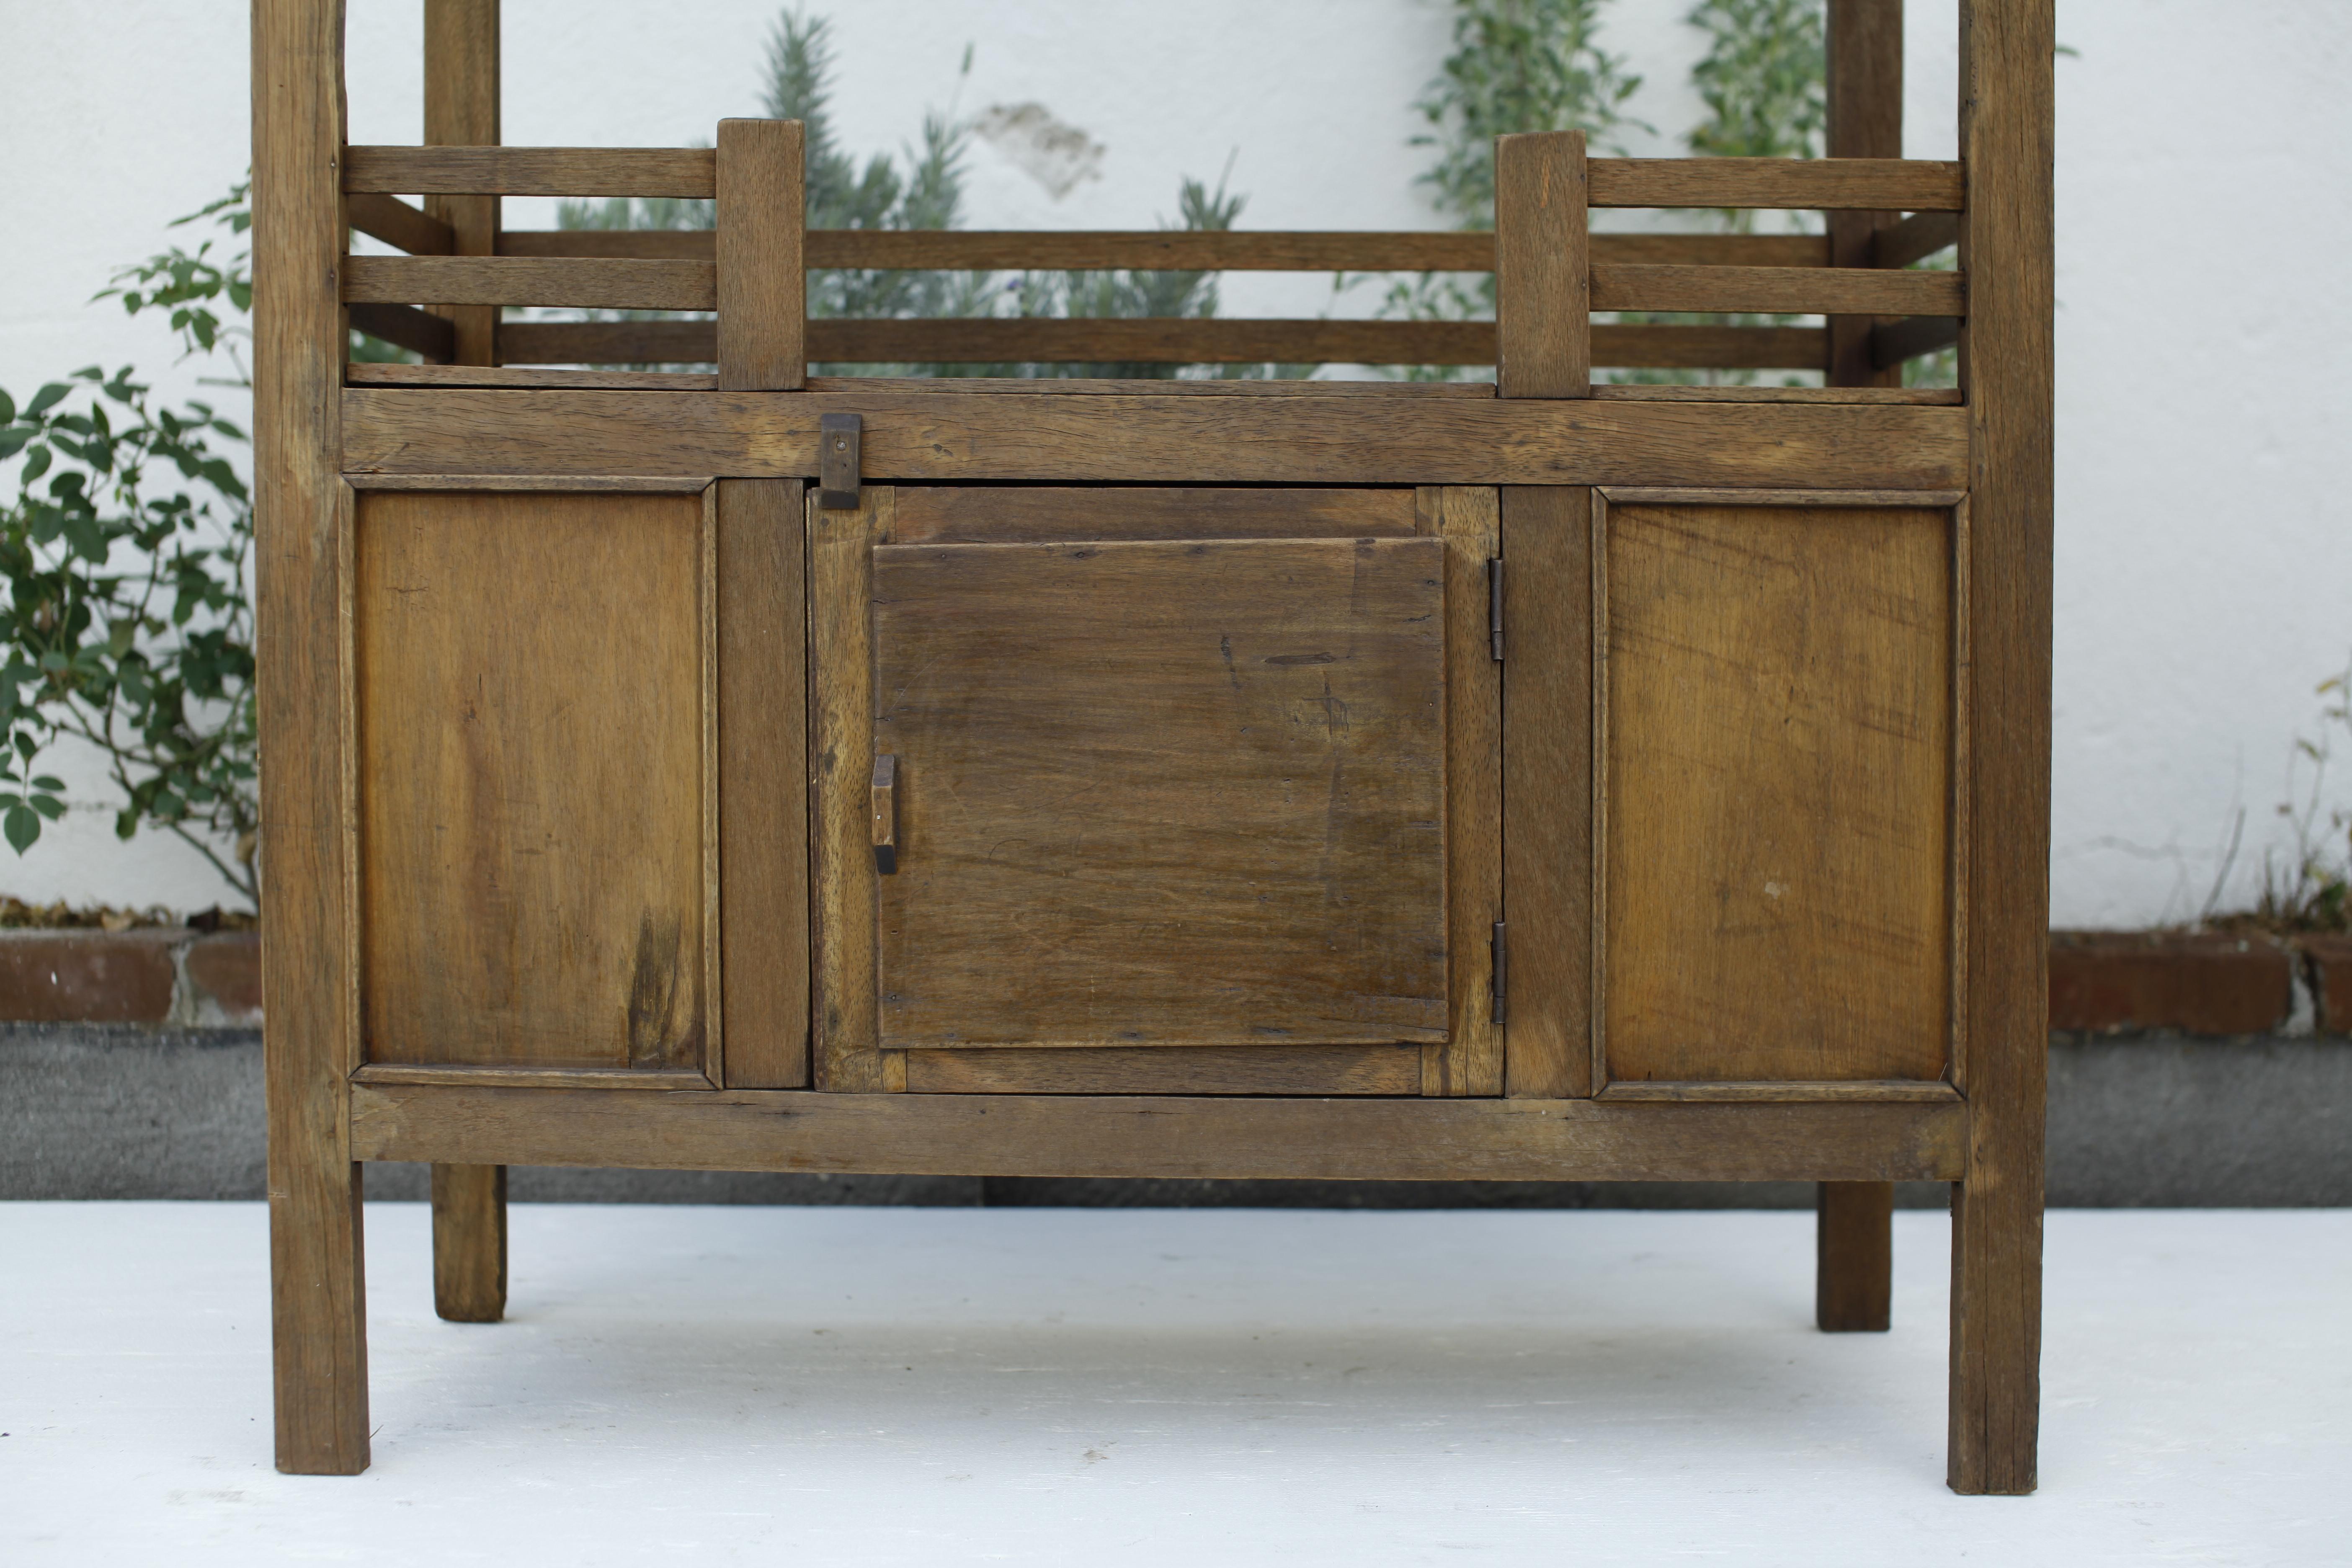 Vietnamese French Colonial Weathered Teak Cabinet with Metal Screen Doors 1930's For Sale